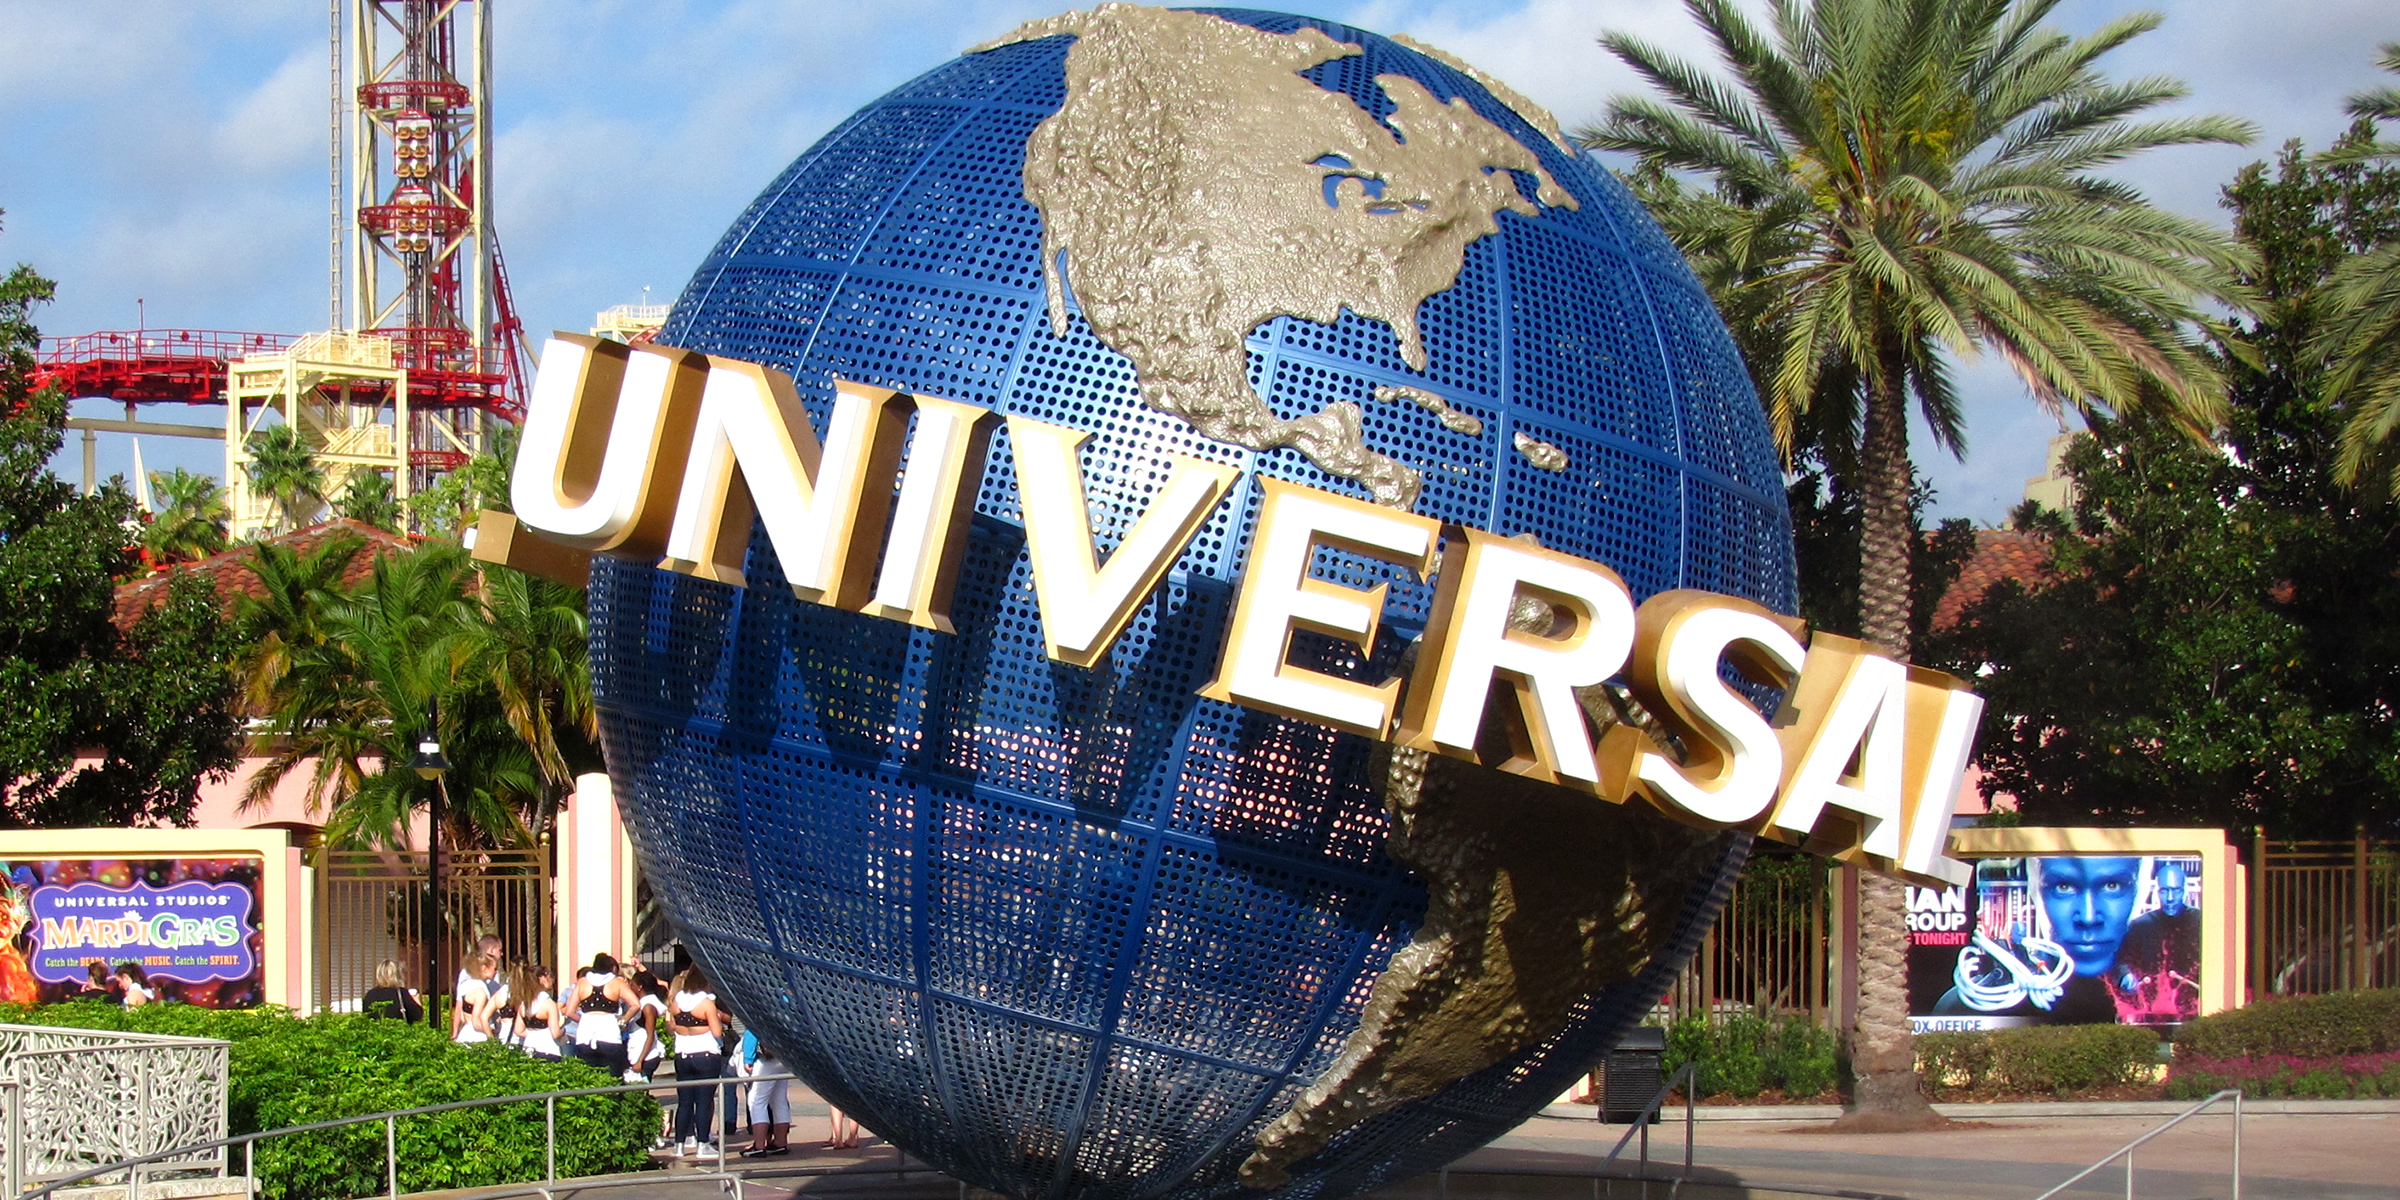 Universal Studios | Source: Flickr/Roller Coaster Philosophy/CC BY 2.0